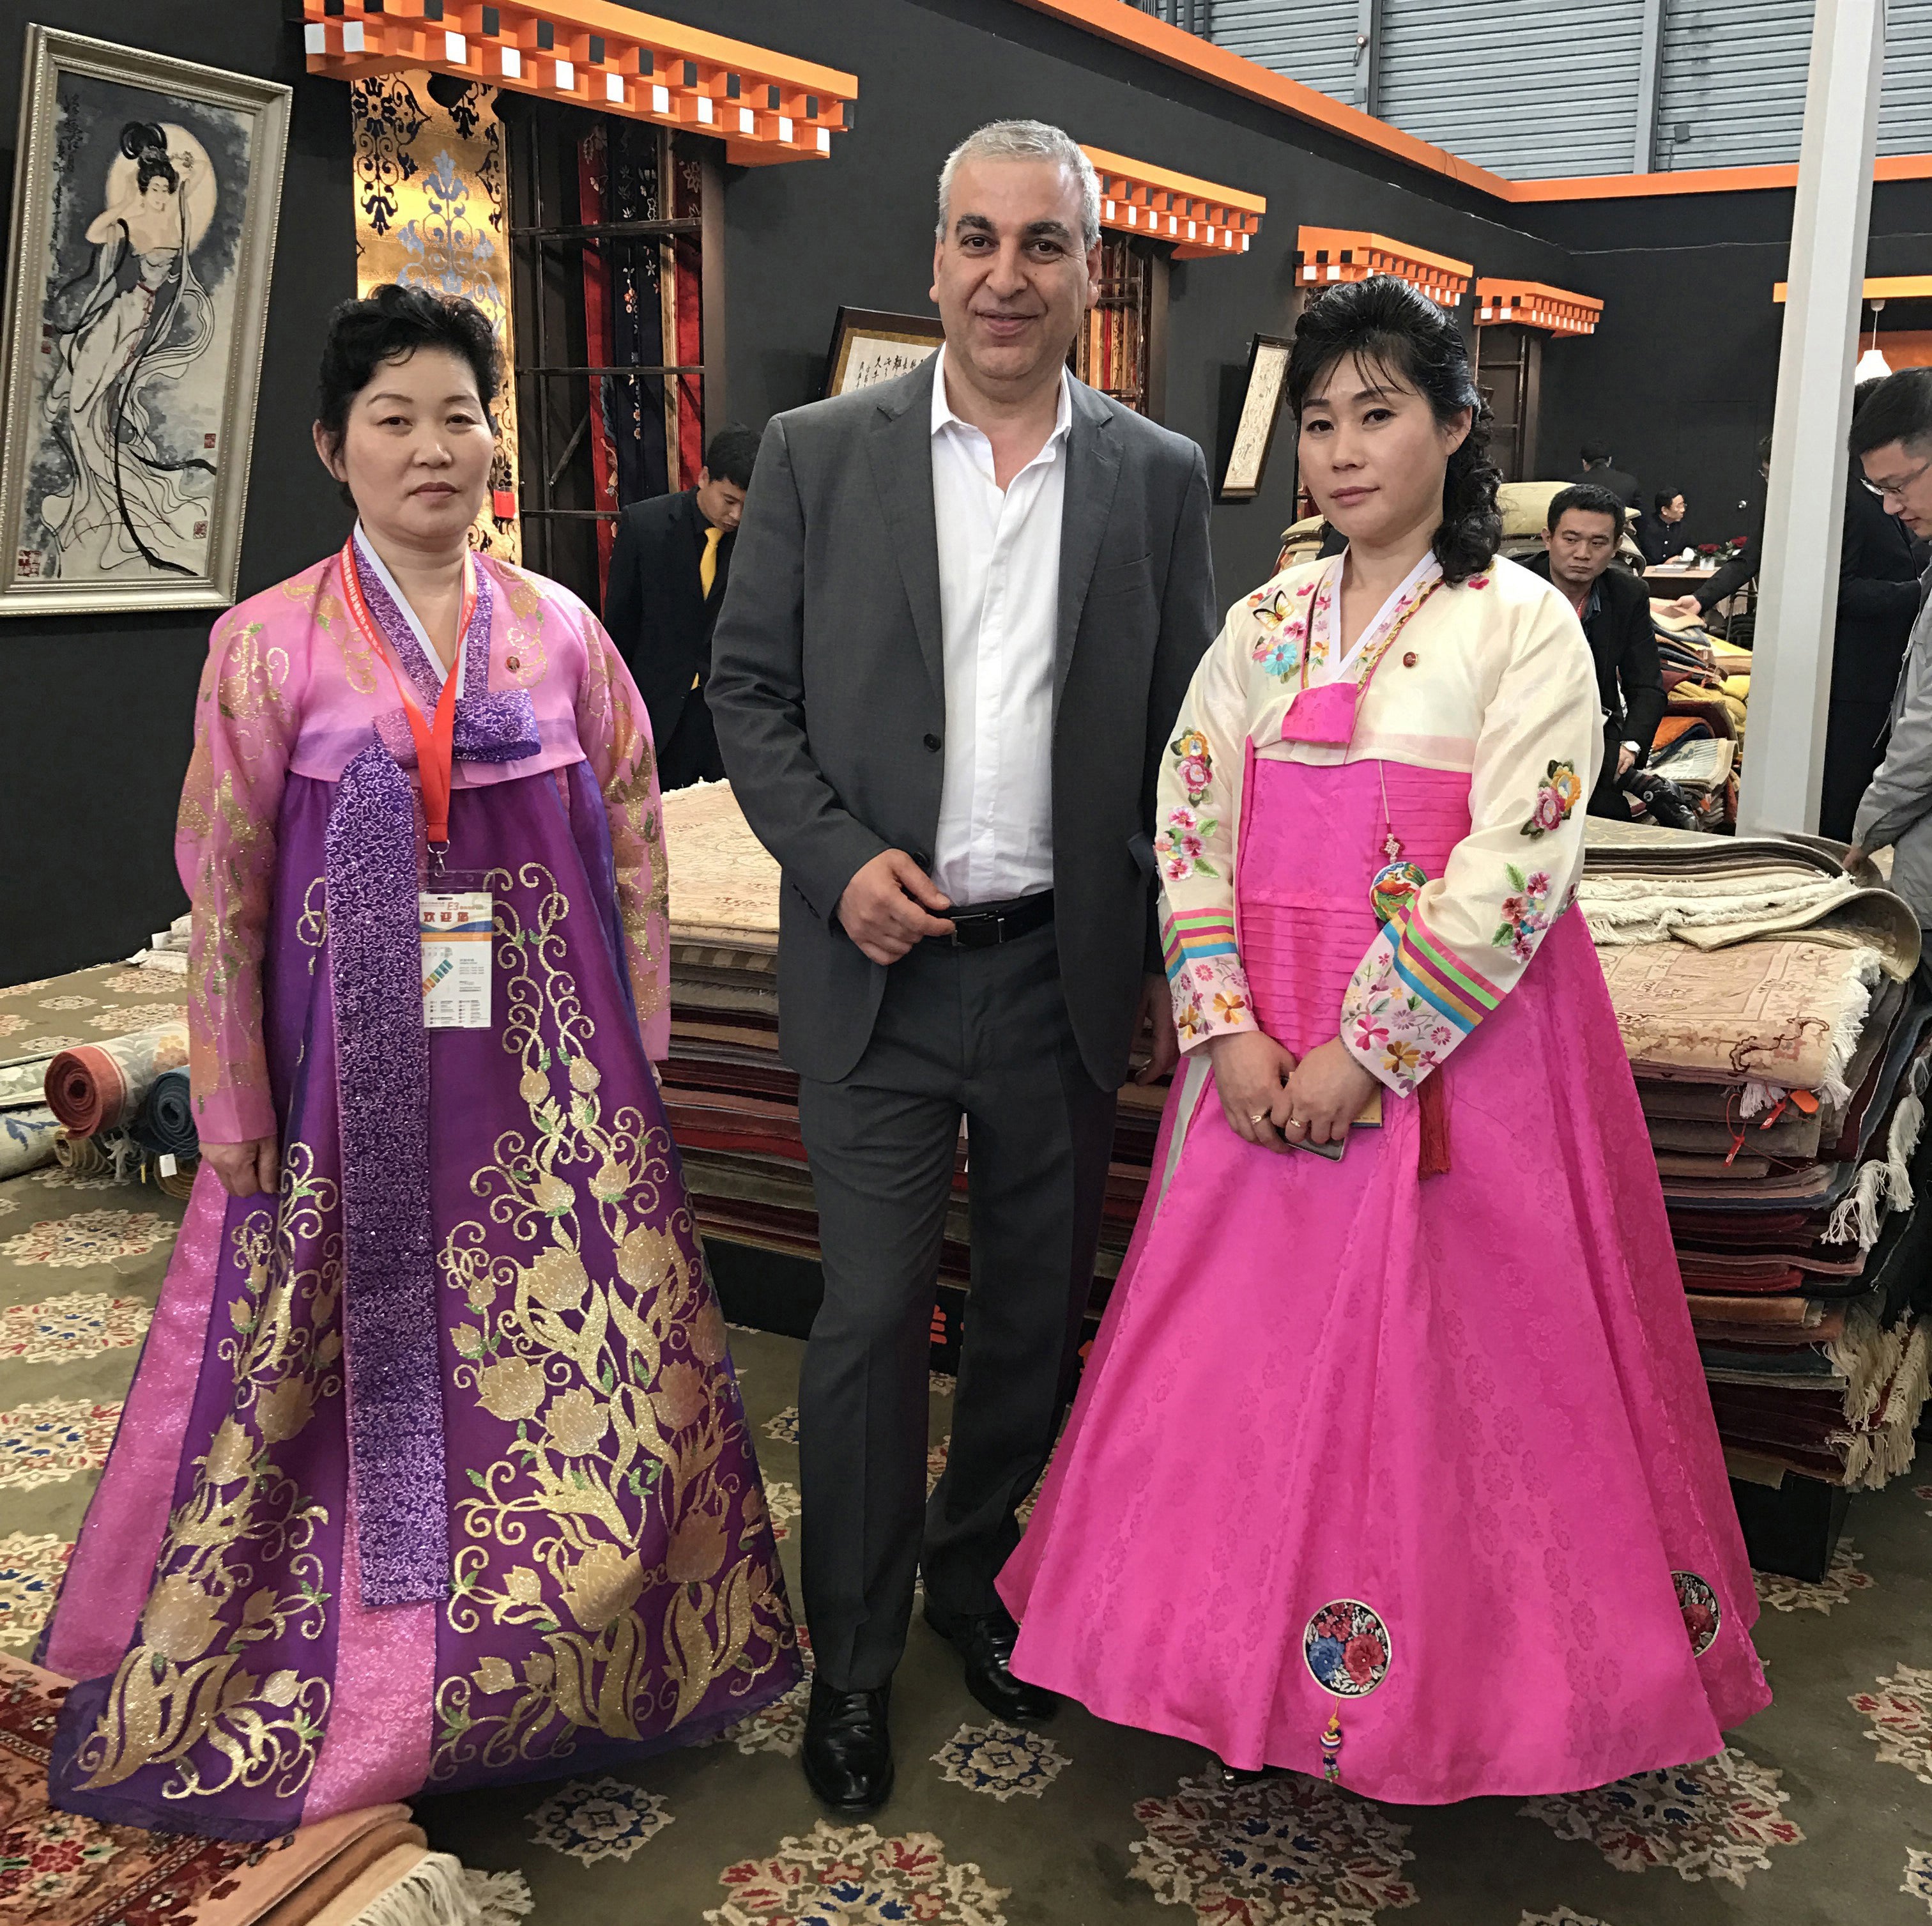 owner with two women wearing a traditional Korean dress